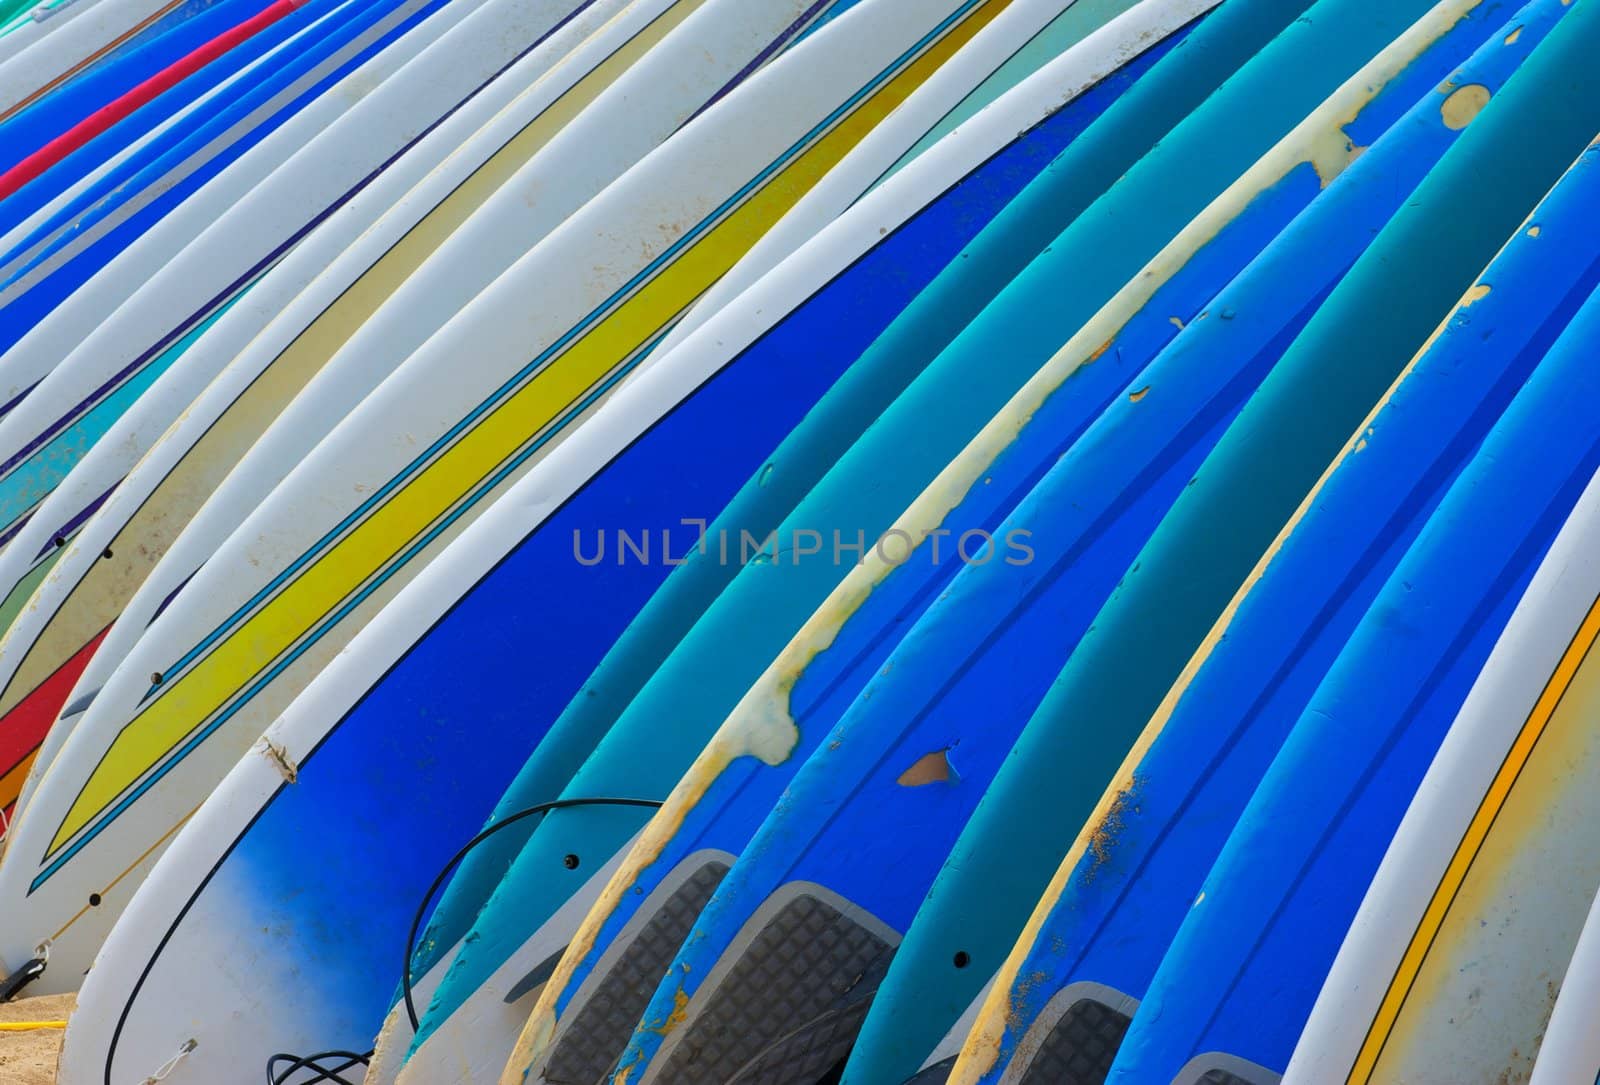 A row of brightly colored rental surf boards with dings and dents from frequent use